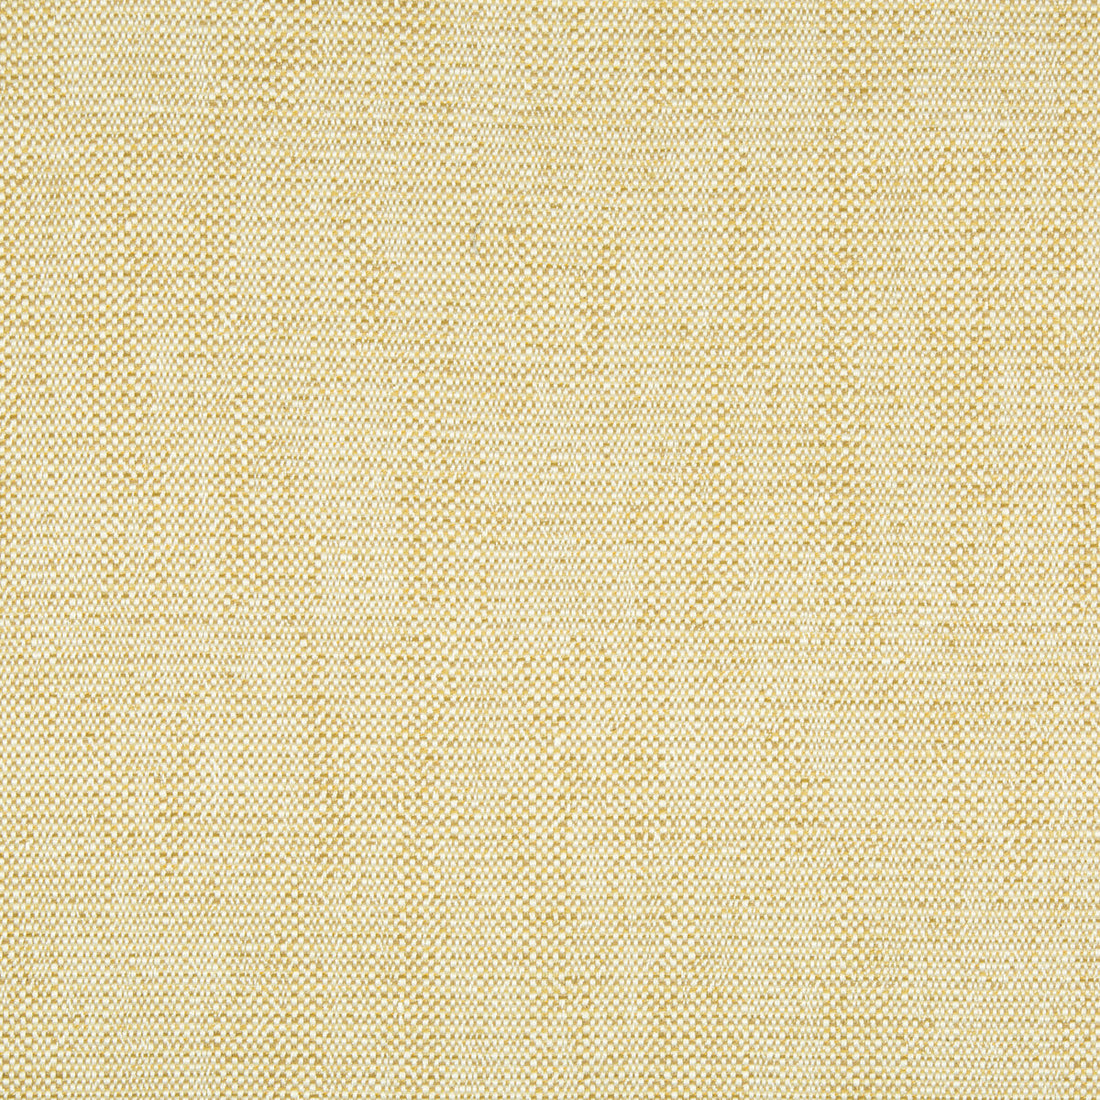 Kravet Contract fabric in 34768-416 color - pattern 34768.416.0 - by Kravet Contract in the Gis collection